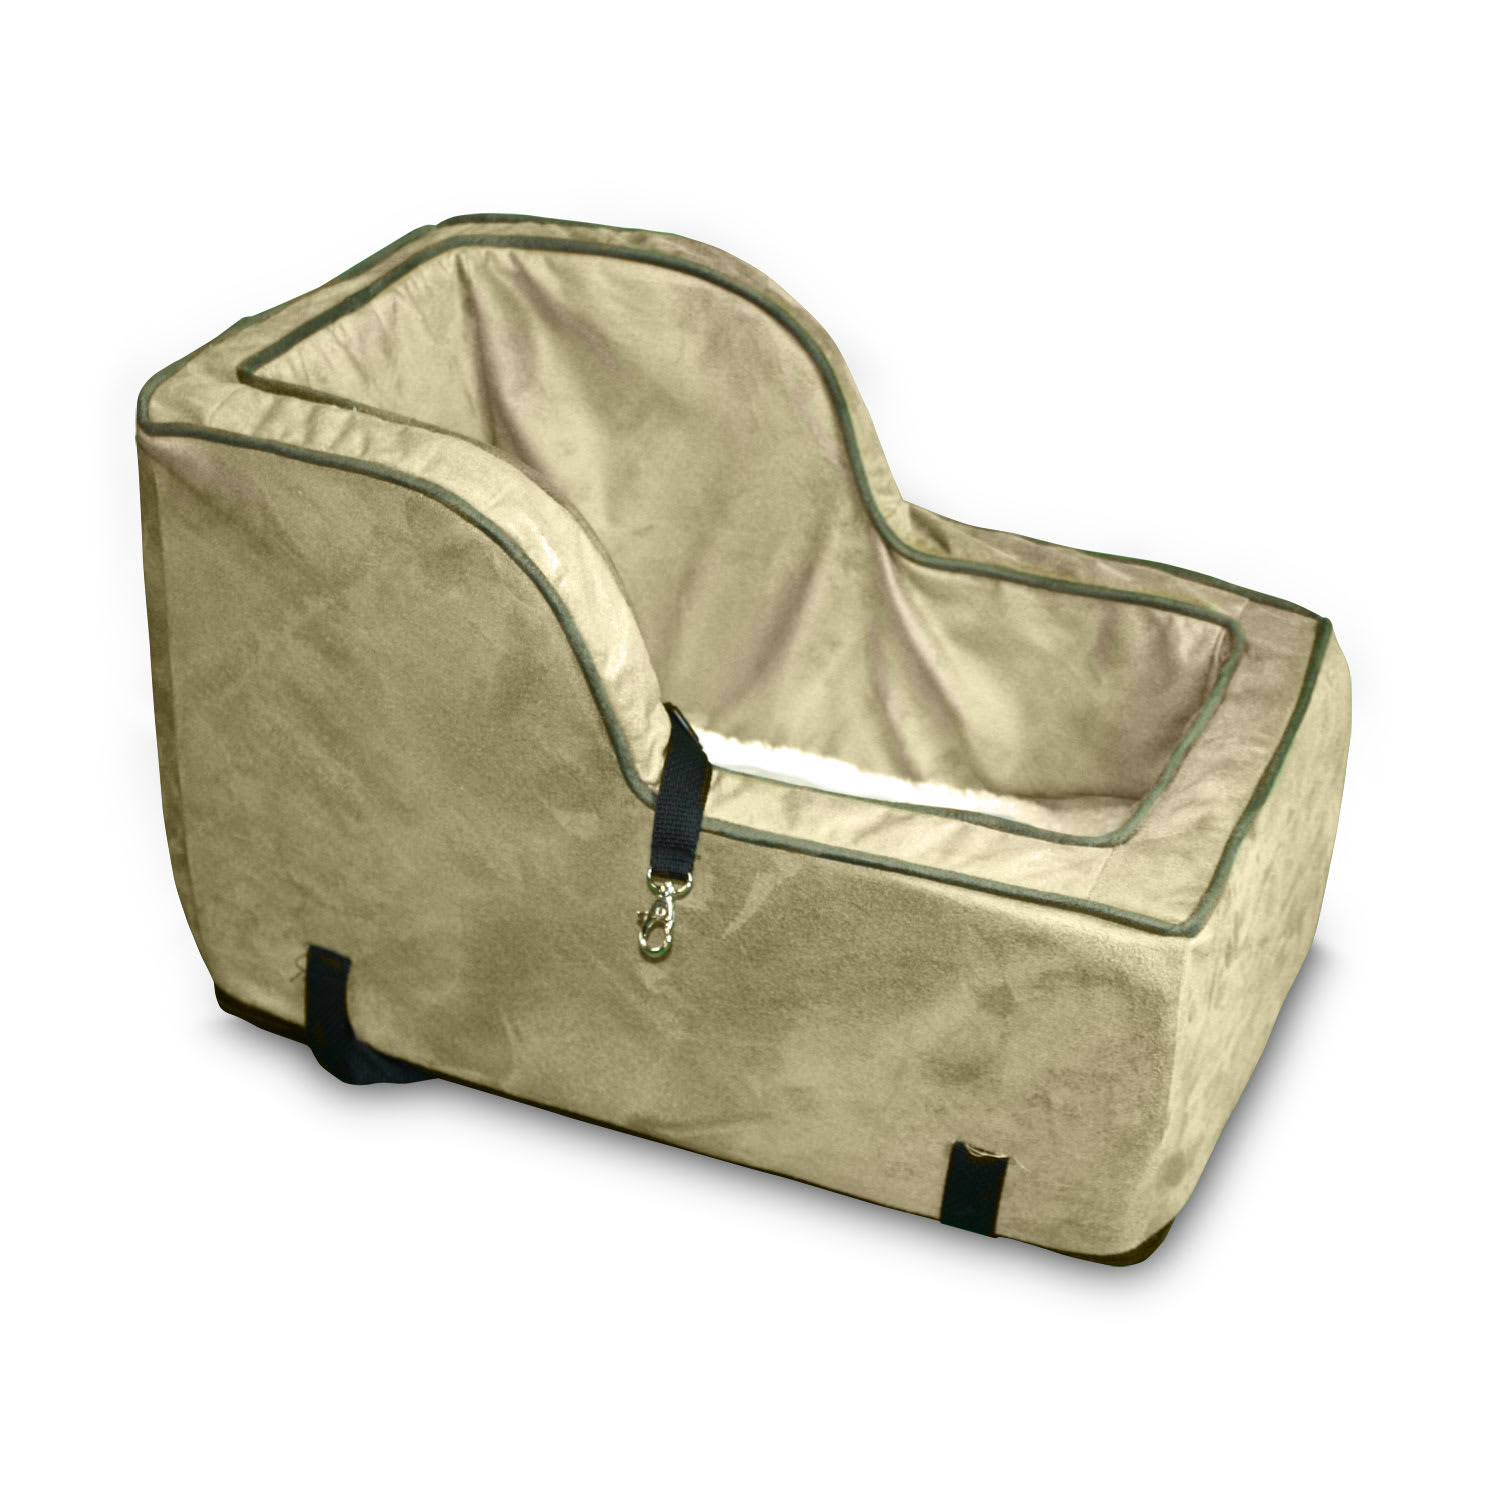 Snoozer Luxury High-Back Console in Camel